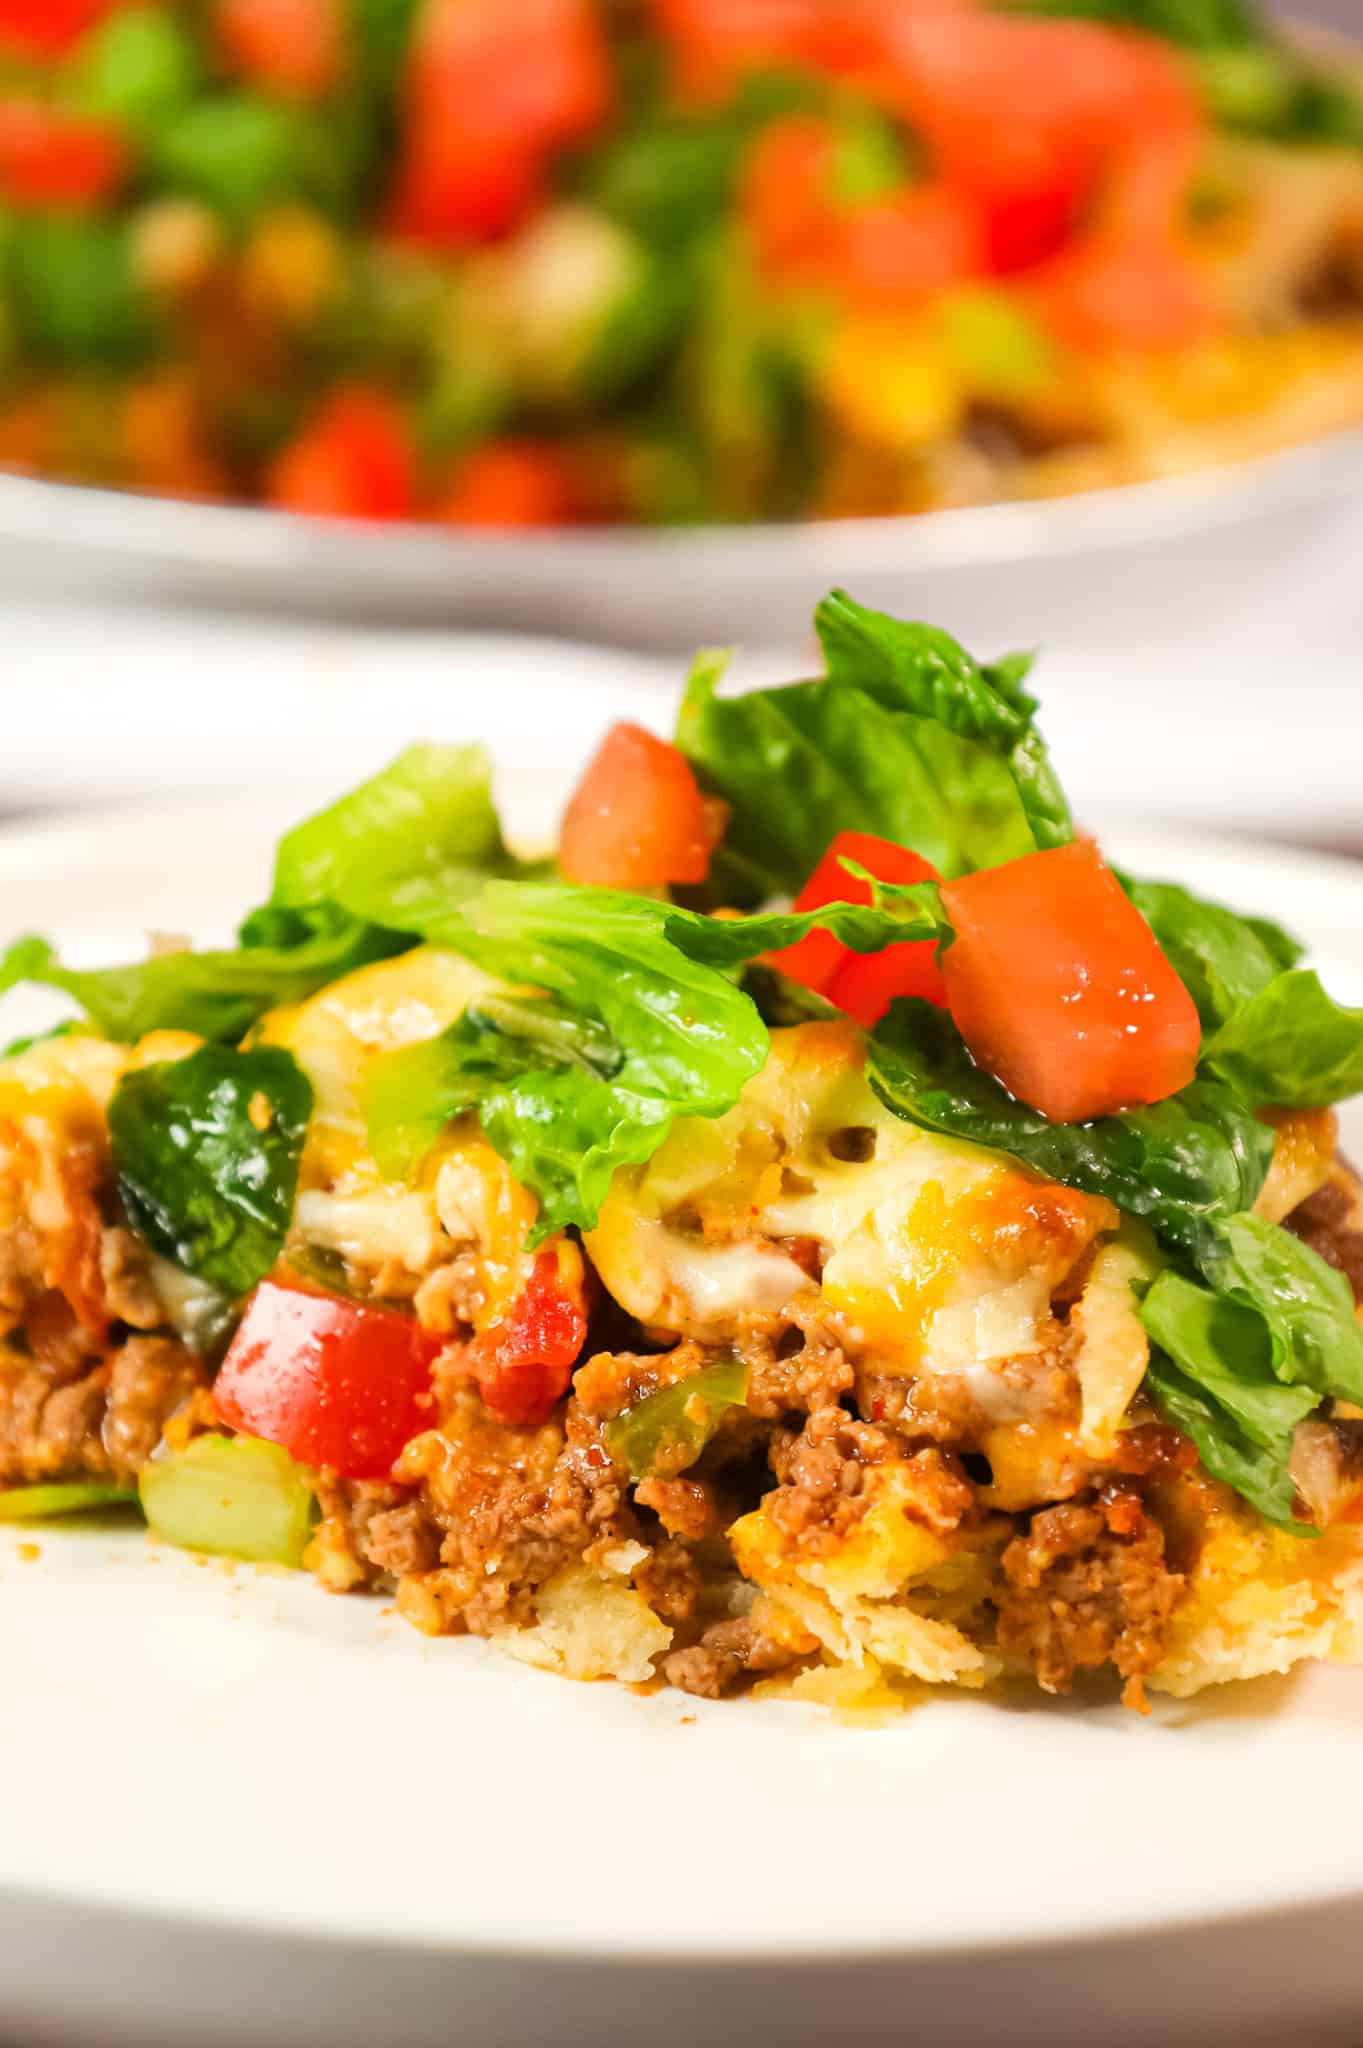 Taco Pie is an easy weeknight dinner recipe using a store bought pie crust loaded with ground beef, green peppers, Rotel and cheese.